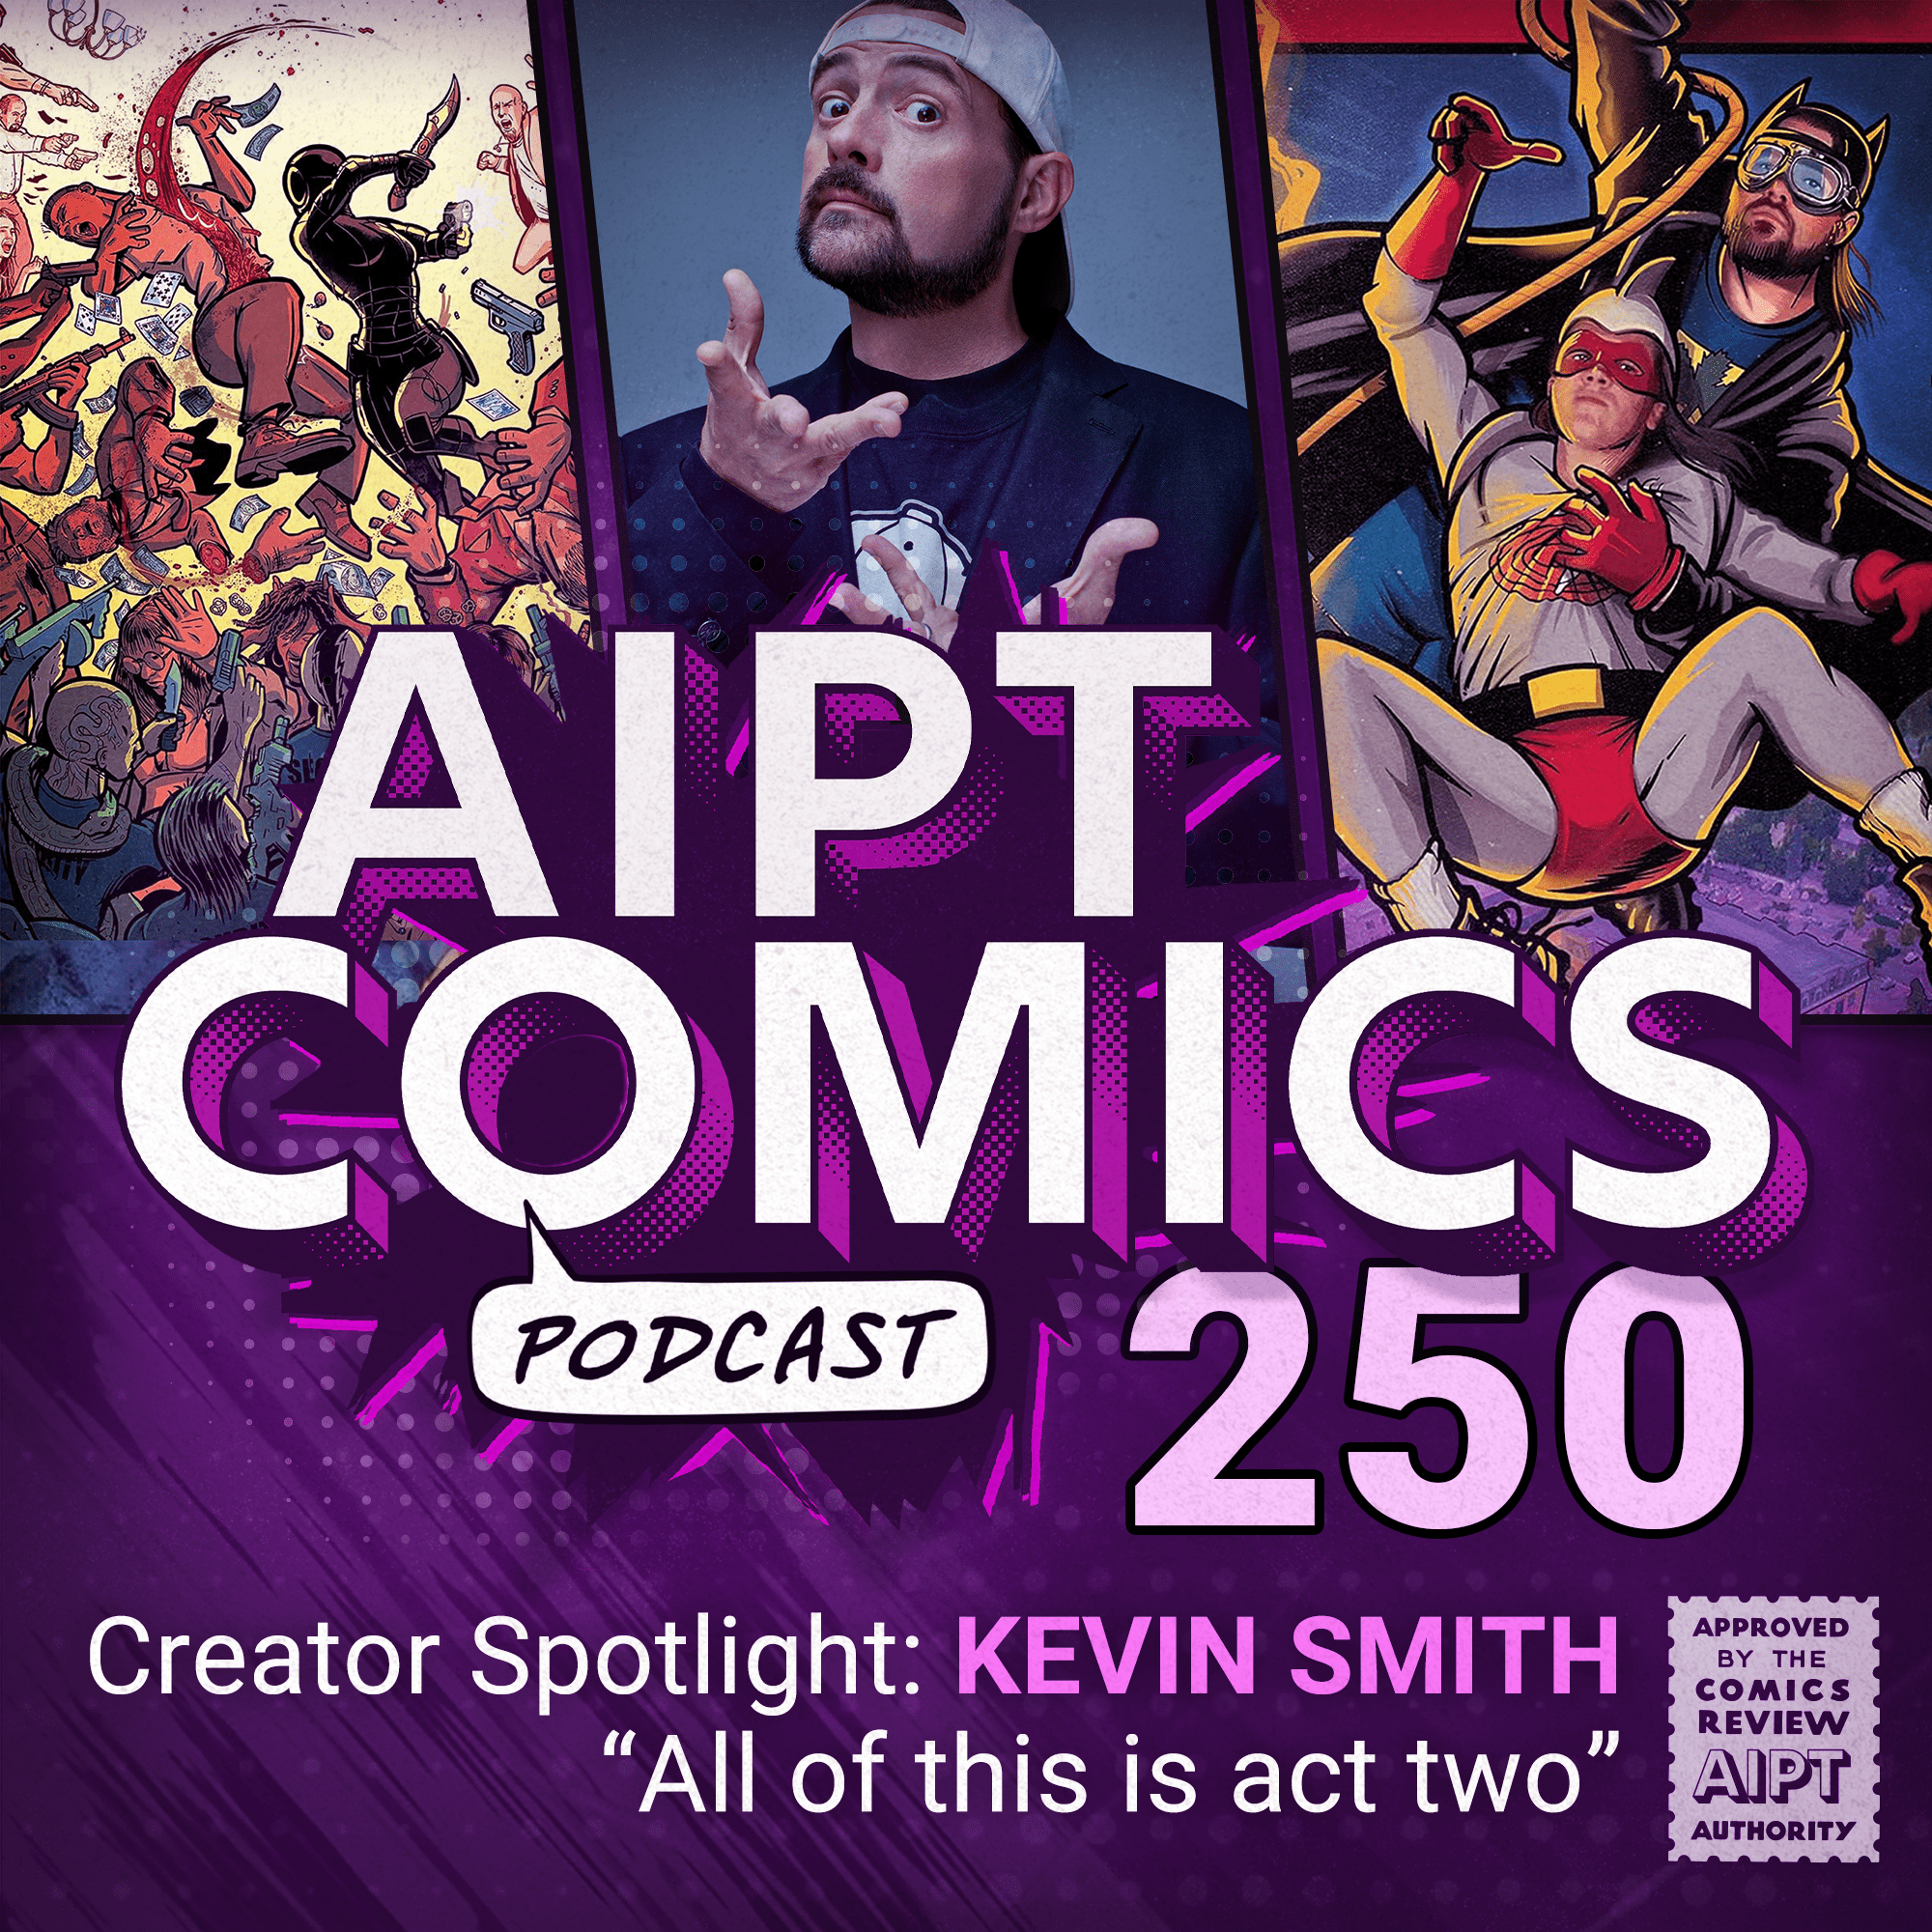 AIPT Comics Podcast Episode 250: Creator Spotlight: Kevin Smith 'All of this is act two'